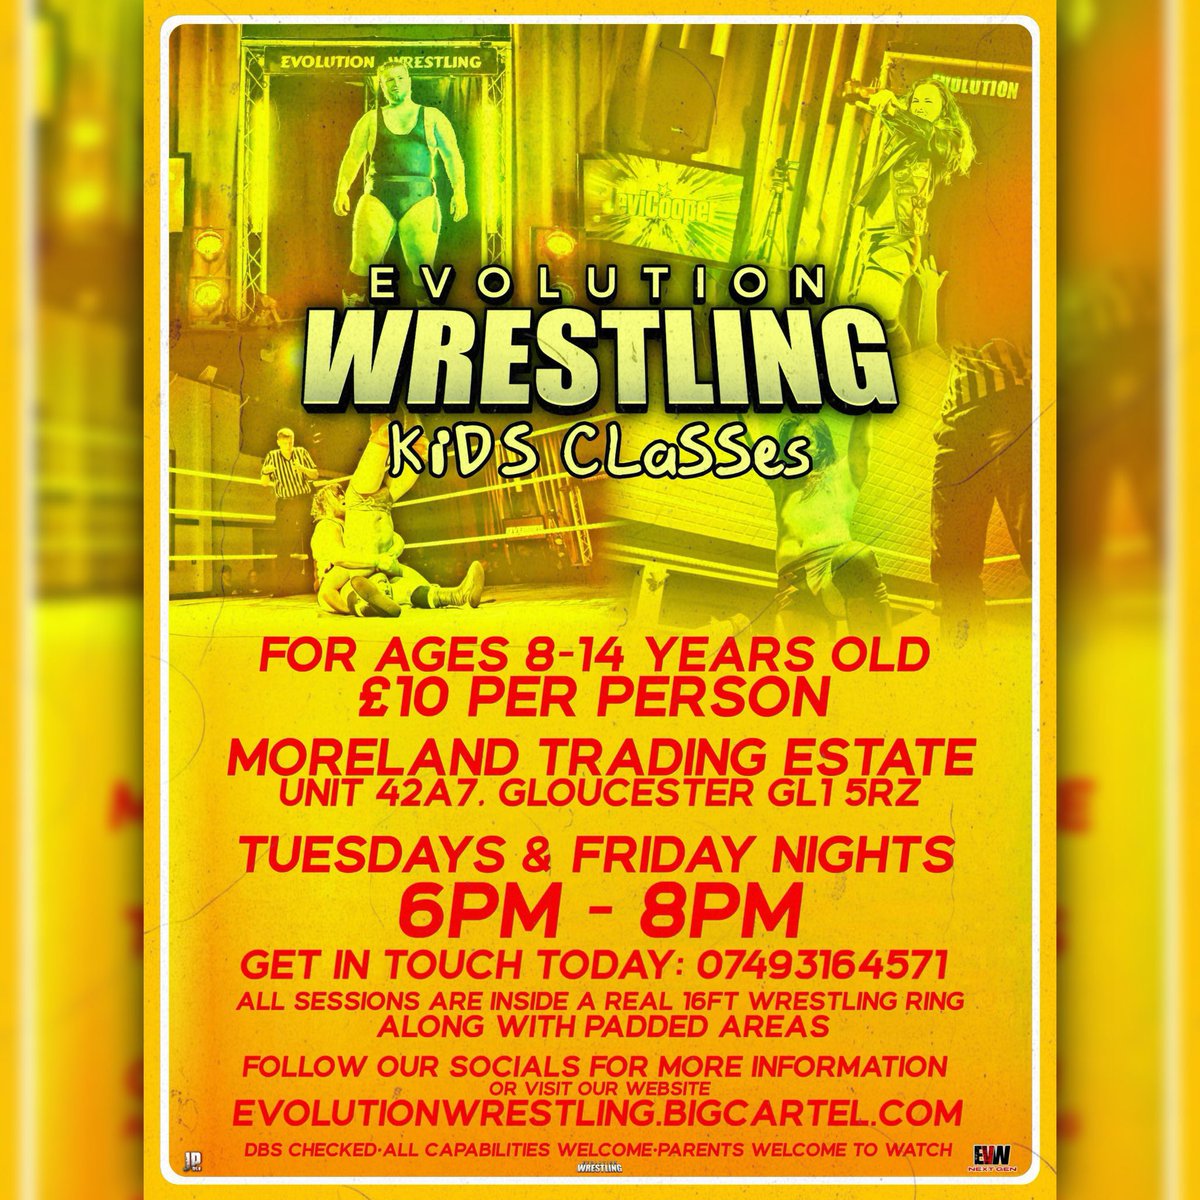 🚨 PROFESSIONAL WRESTLING KIDS CLASSES EVW have been running professional wrestling classes for kids for just over a year now! We’ve held some successful Kids academy shows and got so many great students! Please get in touch to sign up your child today!